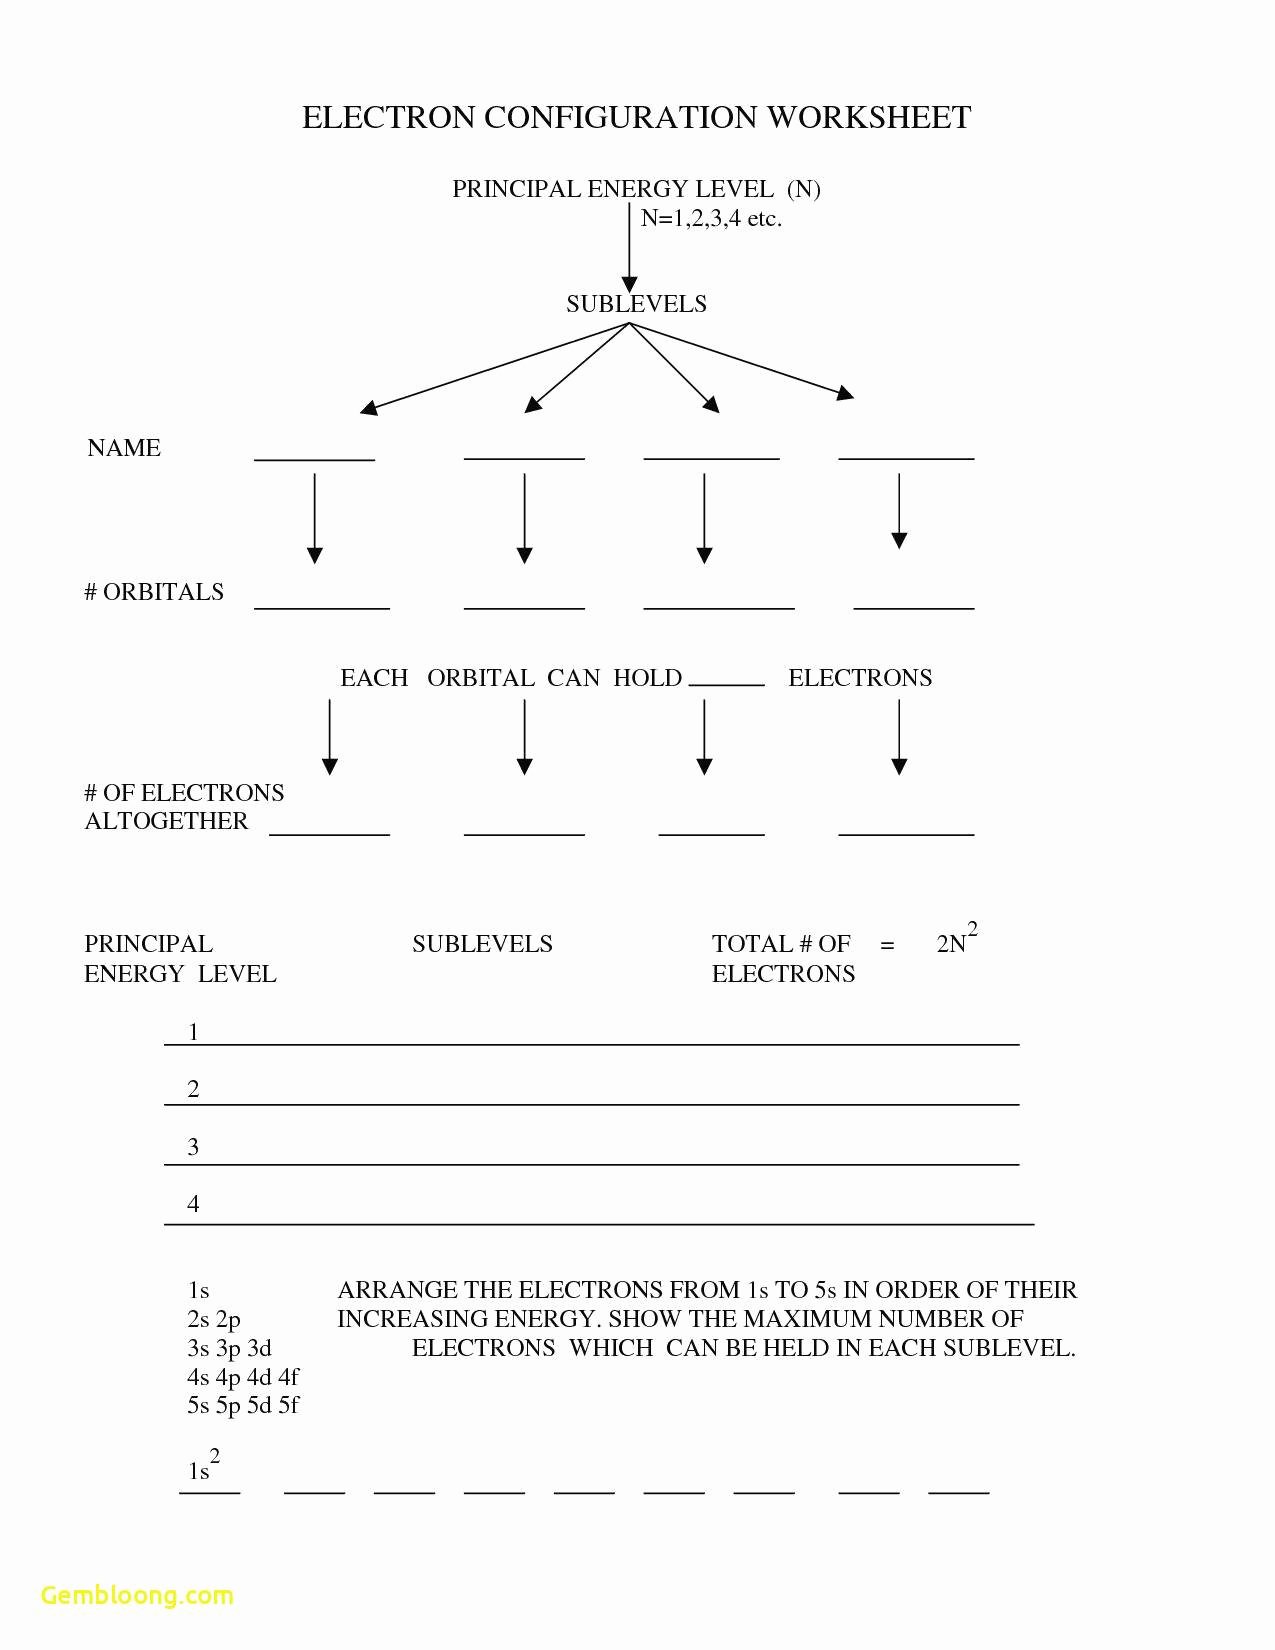 Density Calculations Worksheet 1 Lovely Science 8 Density Calculations Worksheet